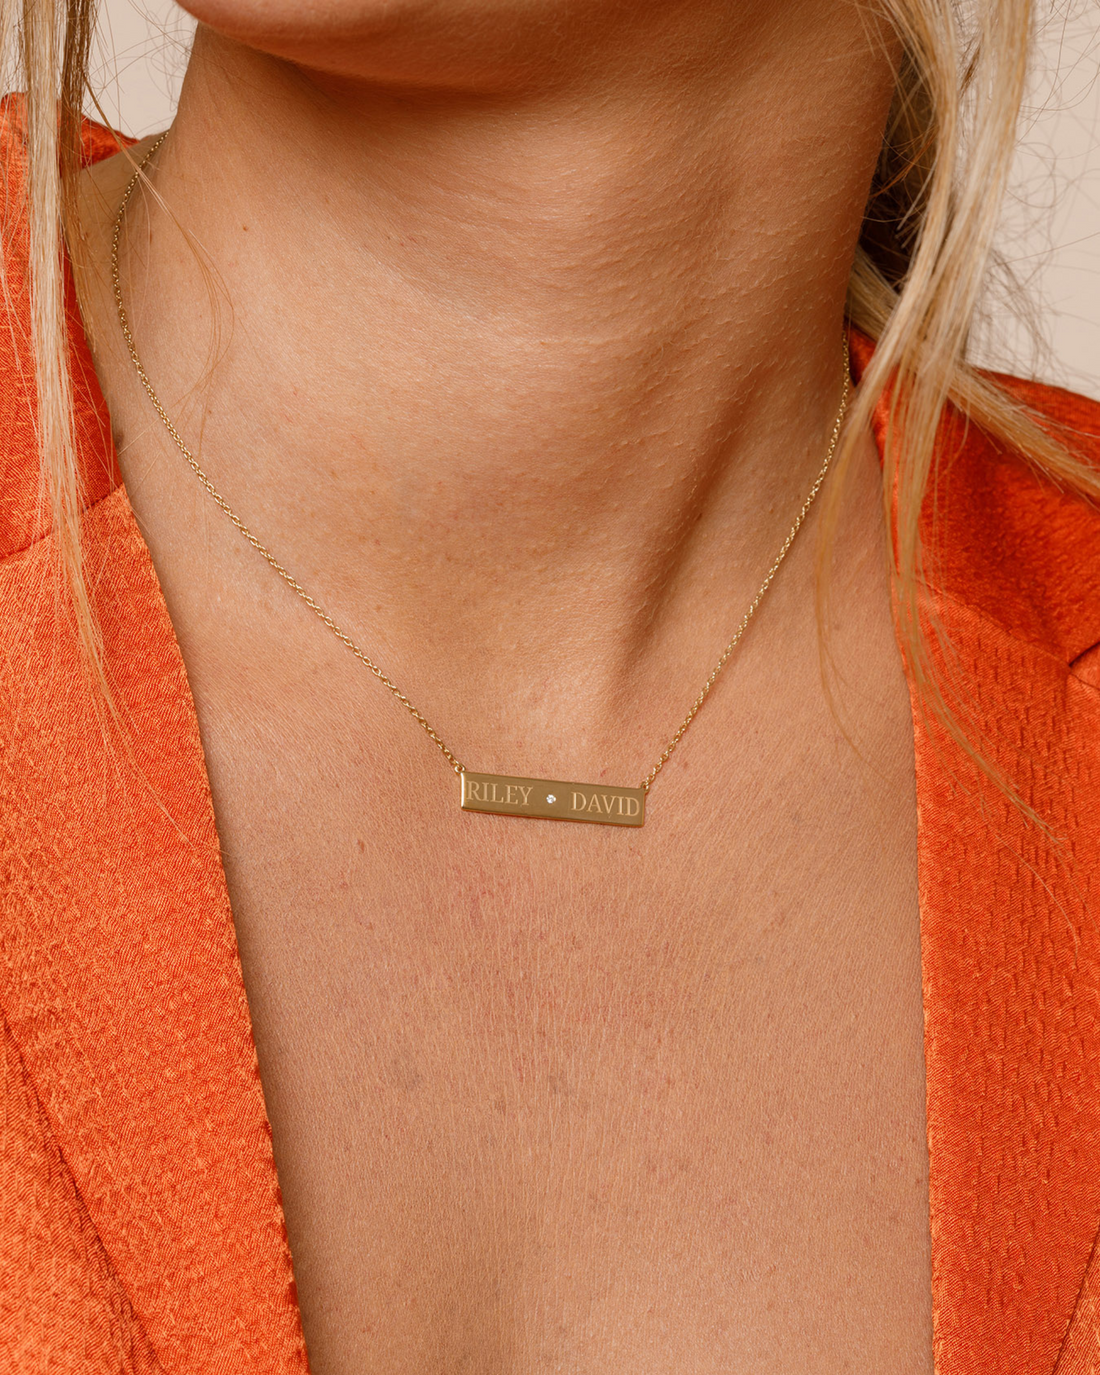 Engraved Name Necklace for Us